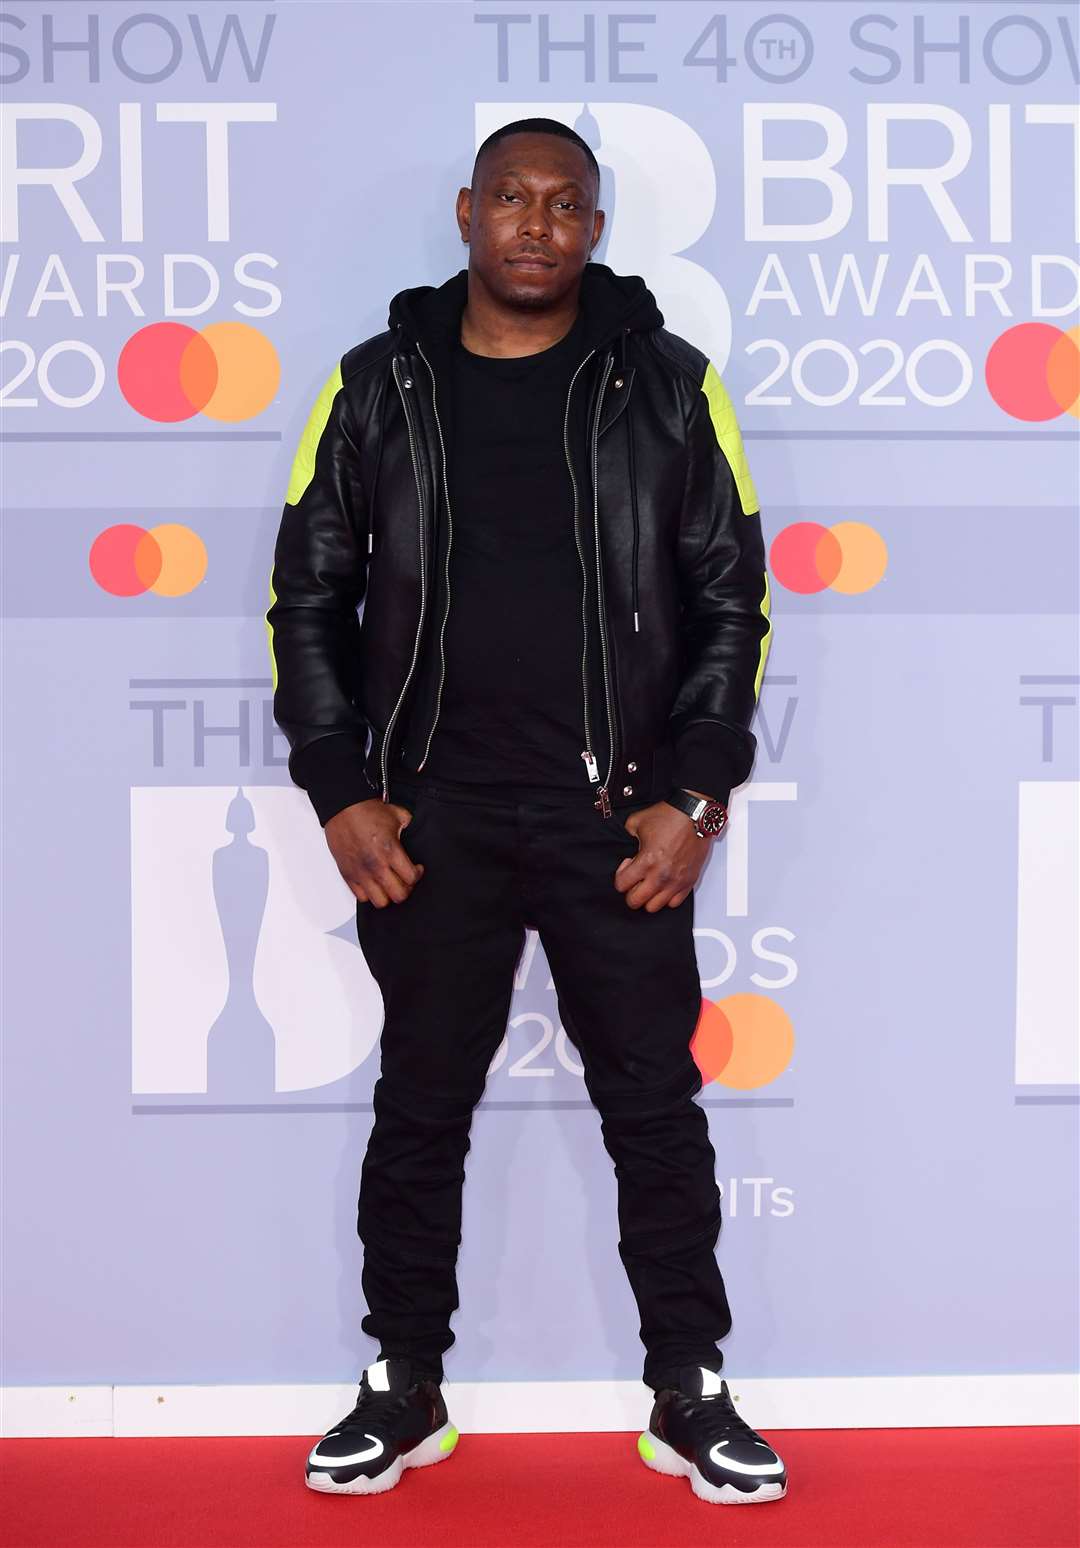 Dizzee Rascal arriving at the 2020 Brit Awards at the O2 Arena in London (Ian West/PA)